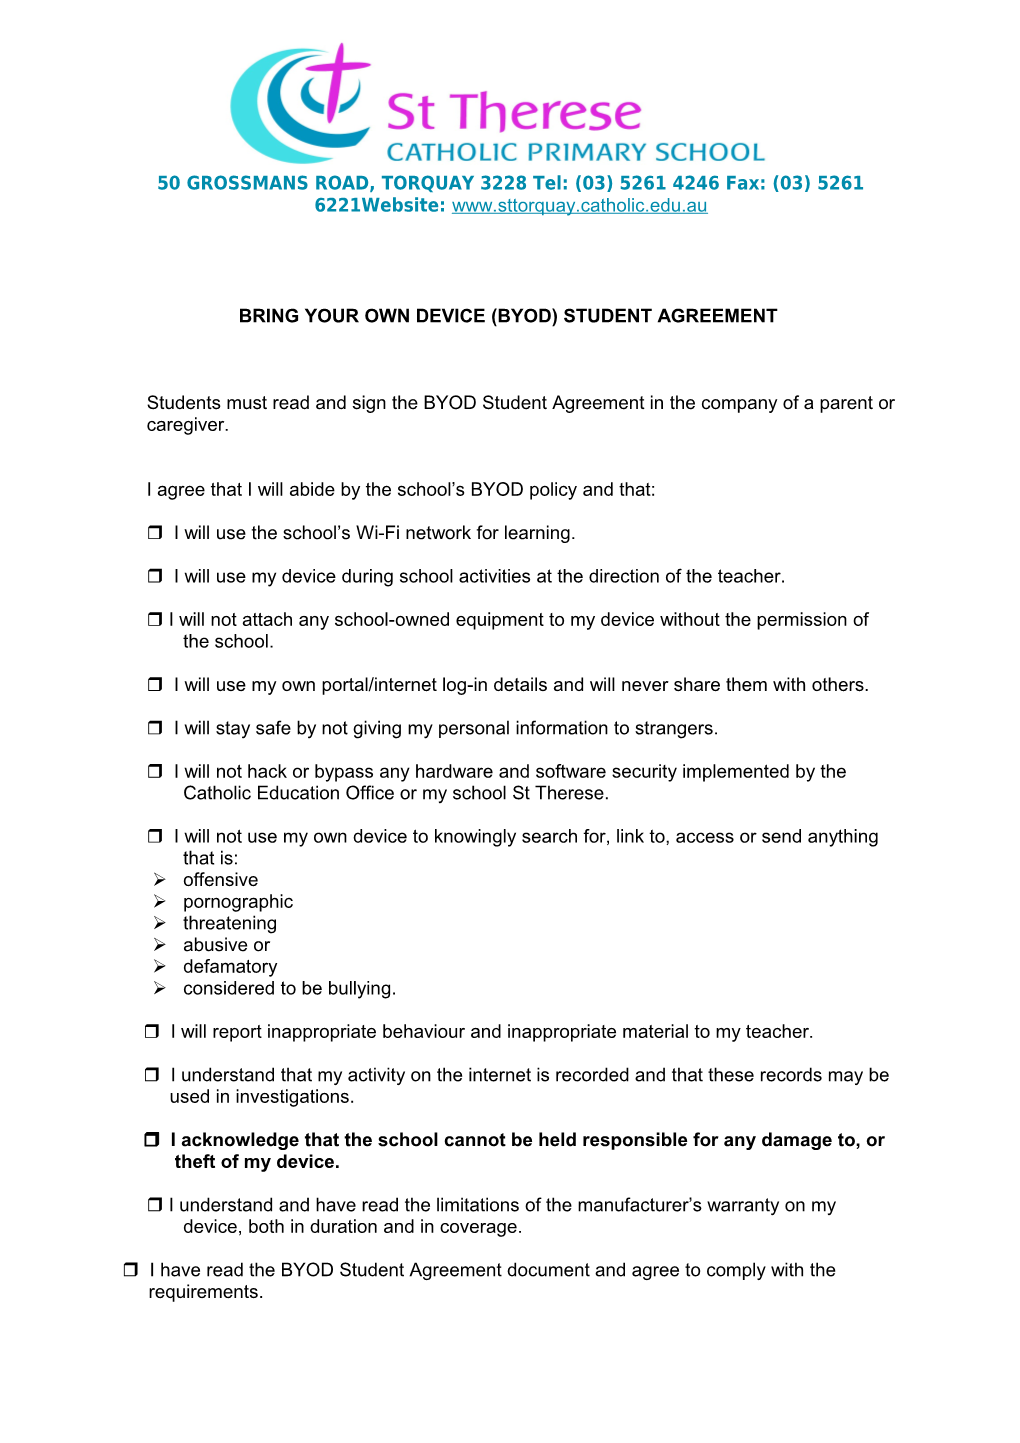 Bring Your Own Device (Byod) Student Agreement